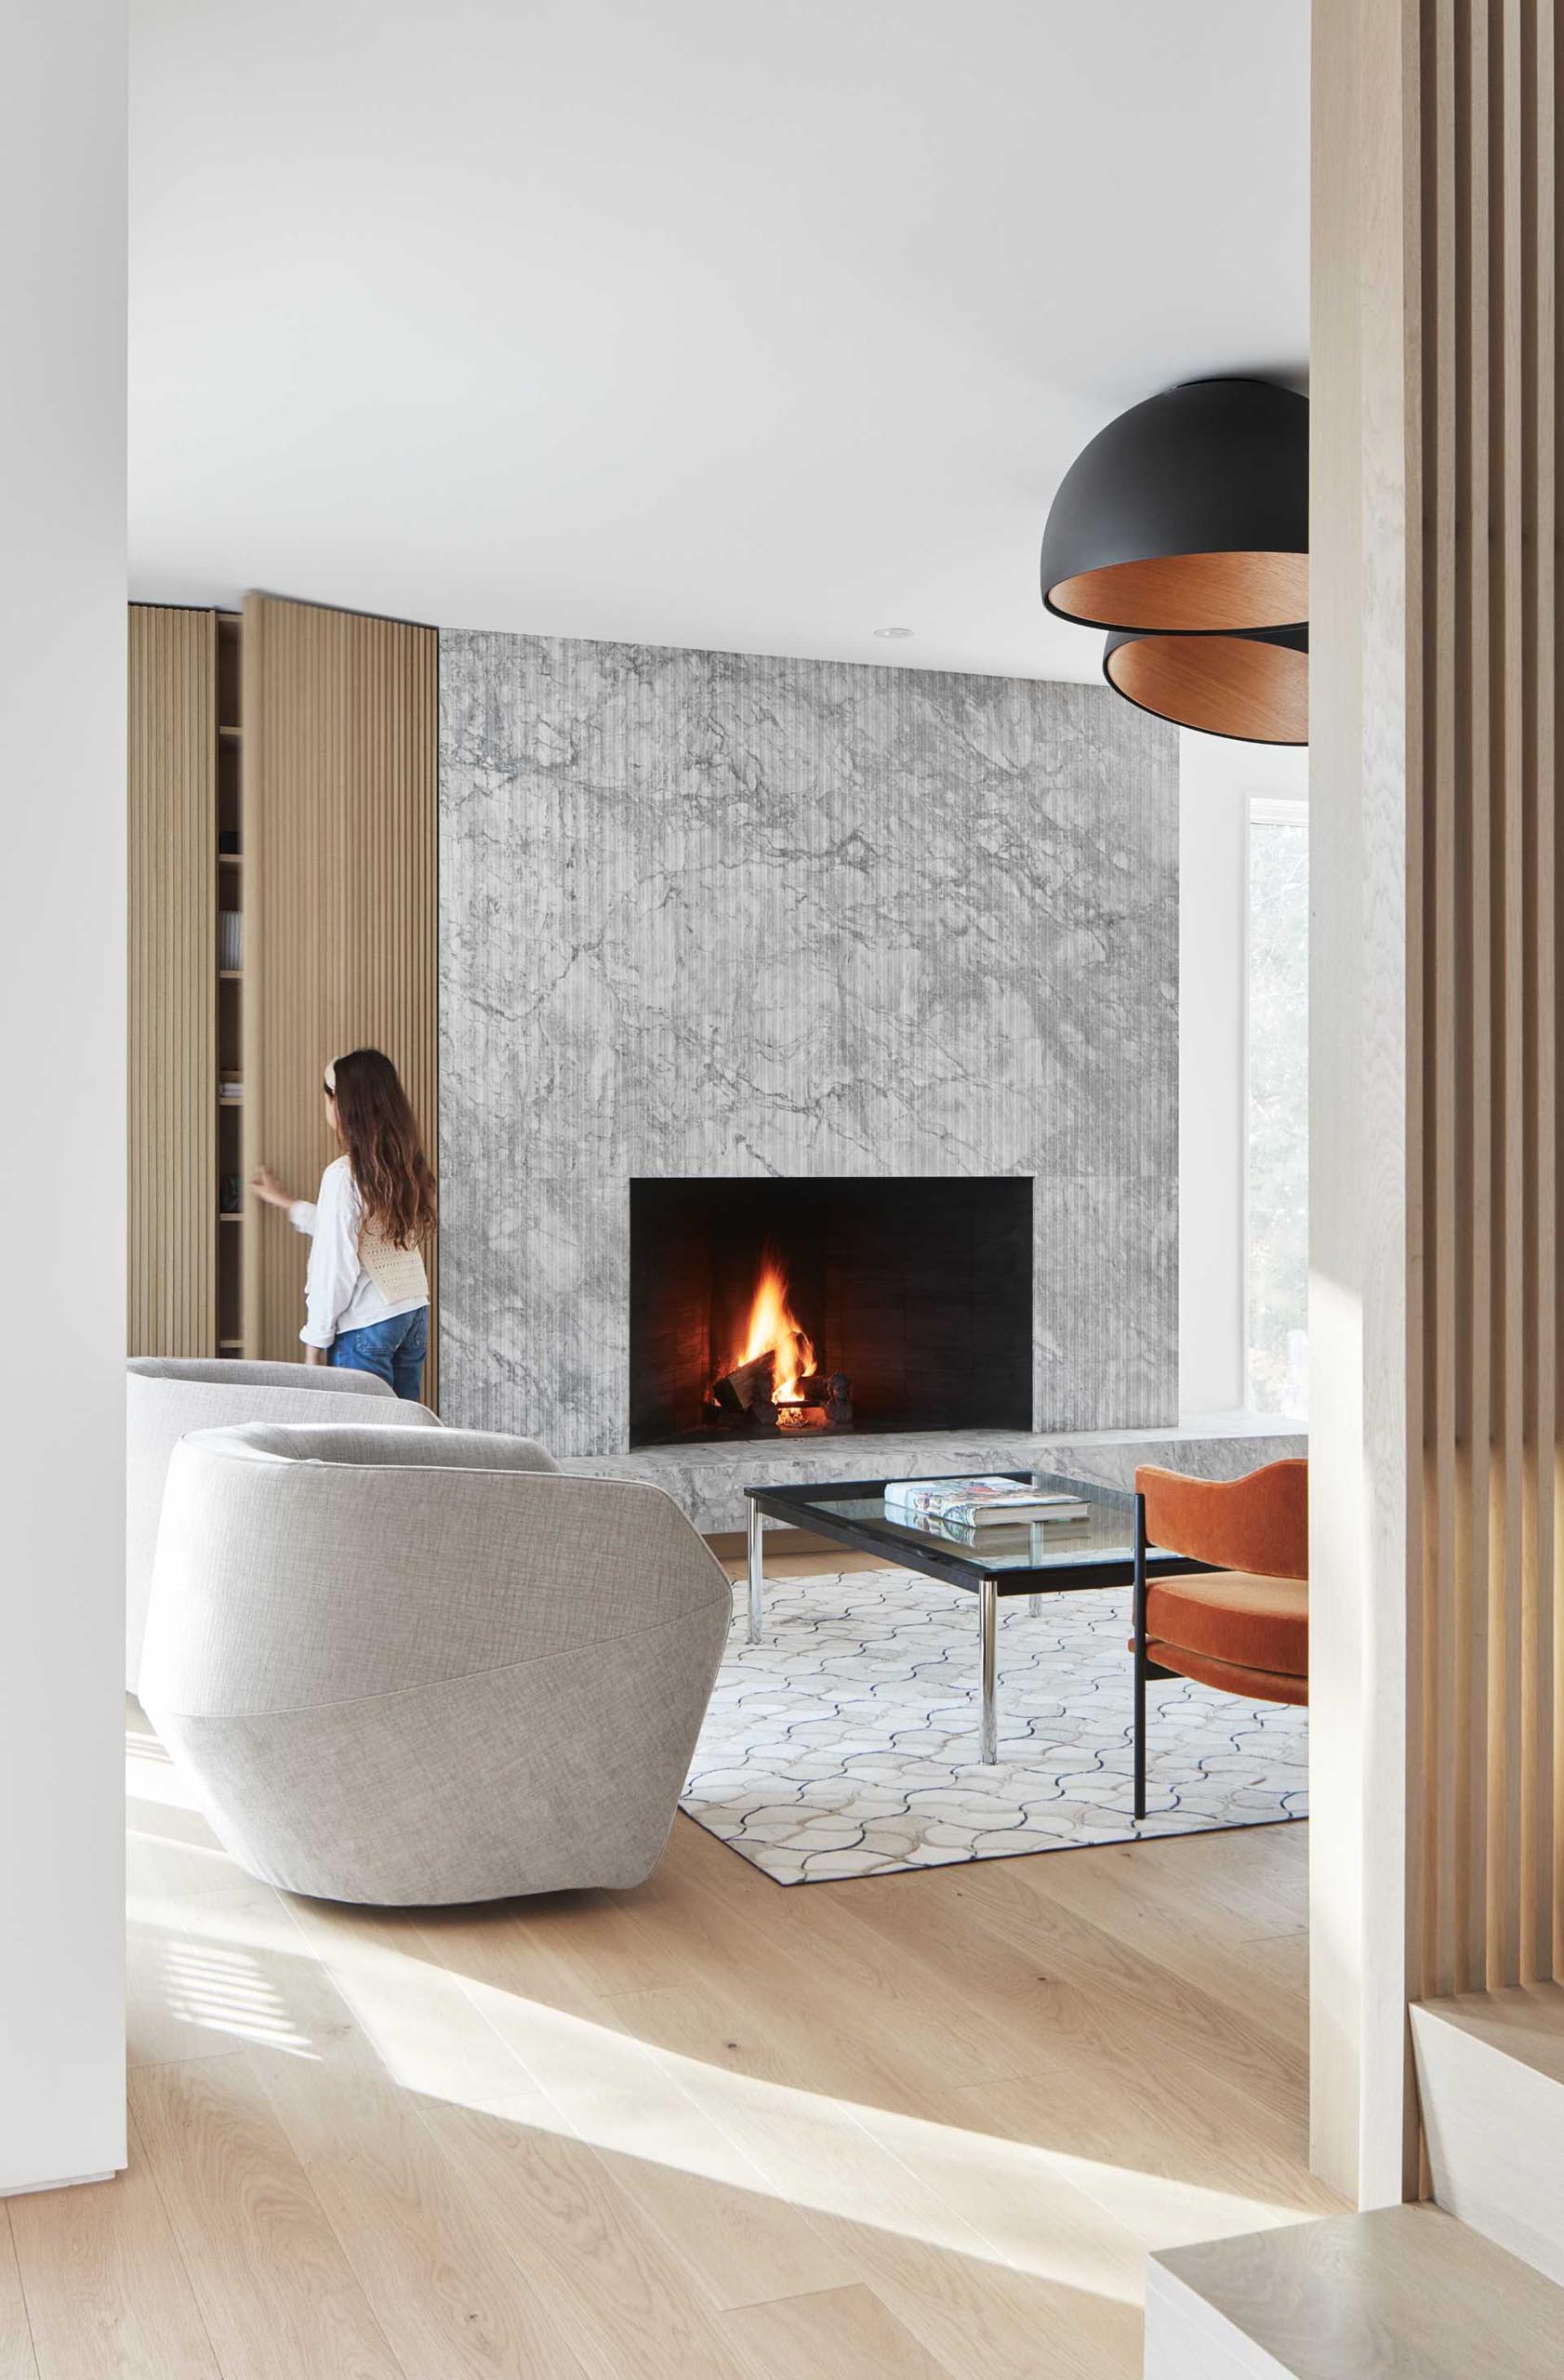 Next to this grey quartz fireplace surround is a wood slat detail that hides a storage cabinet.